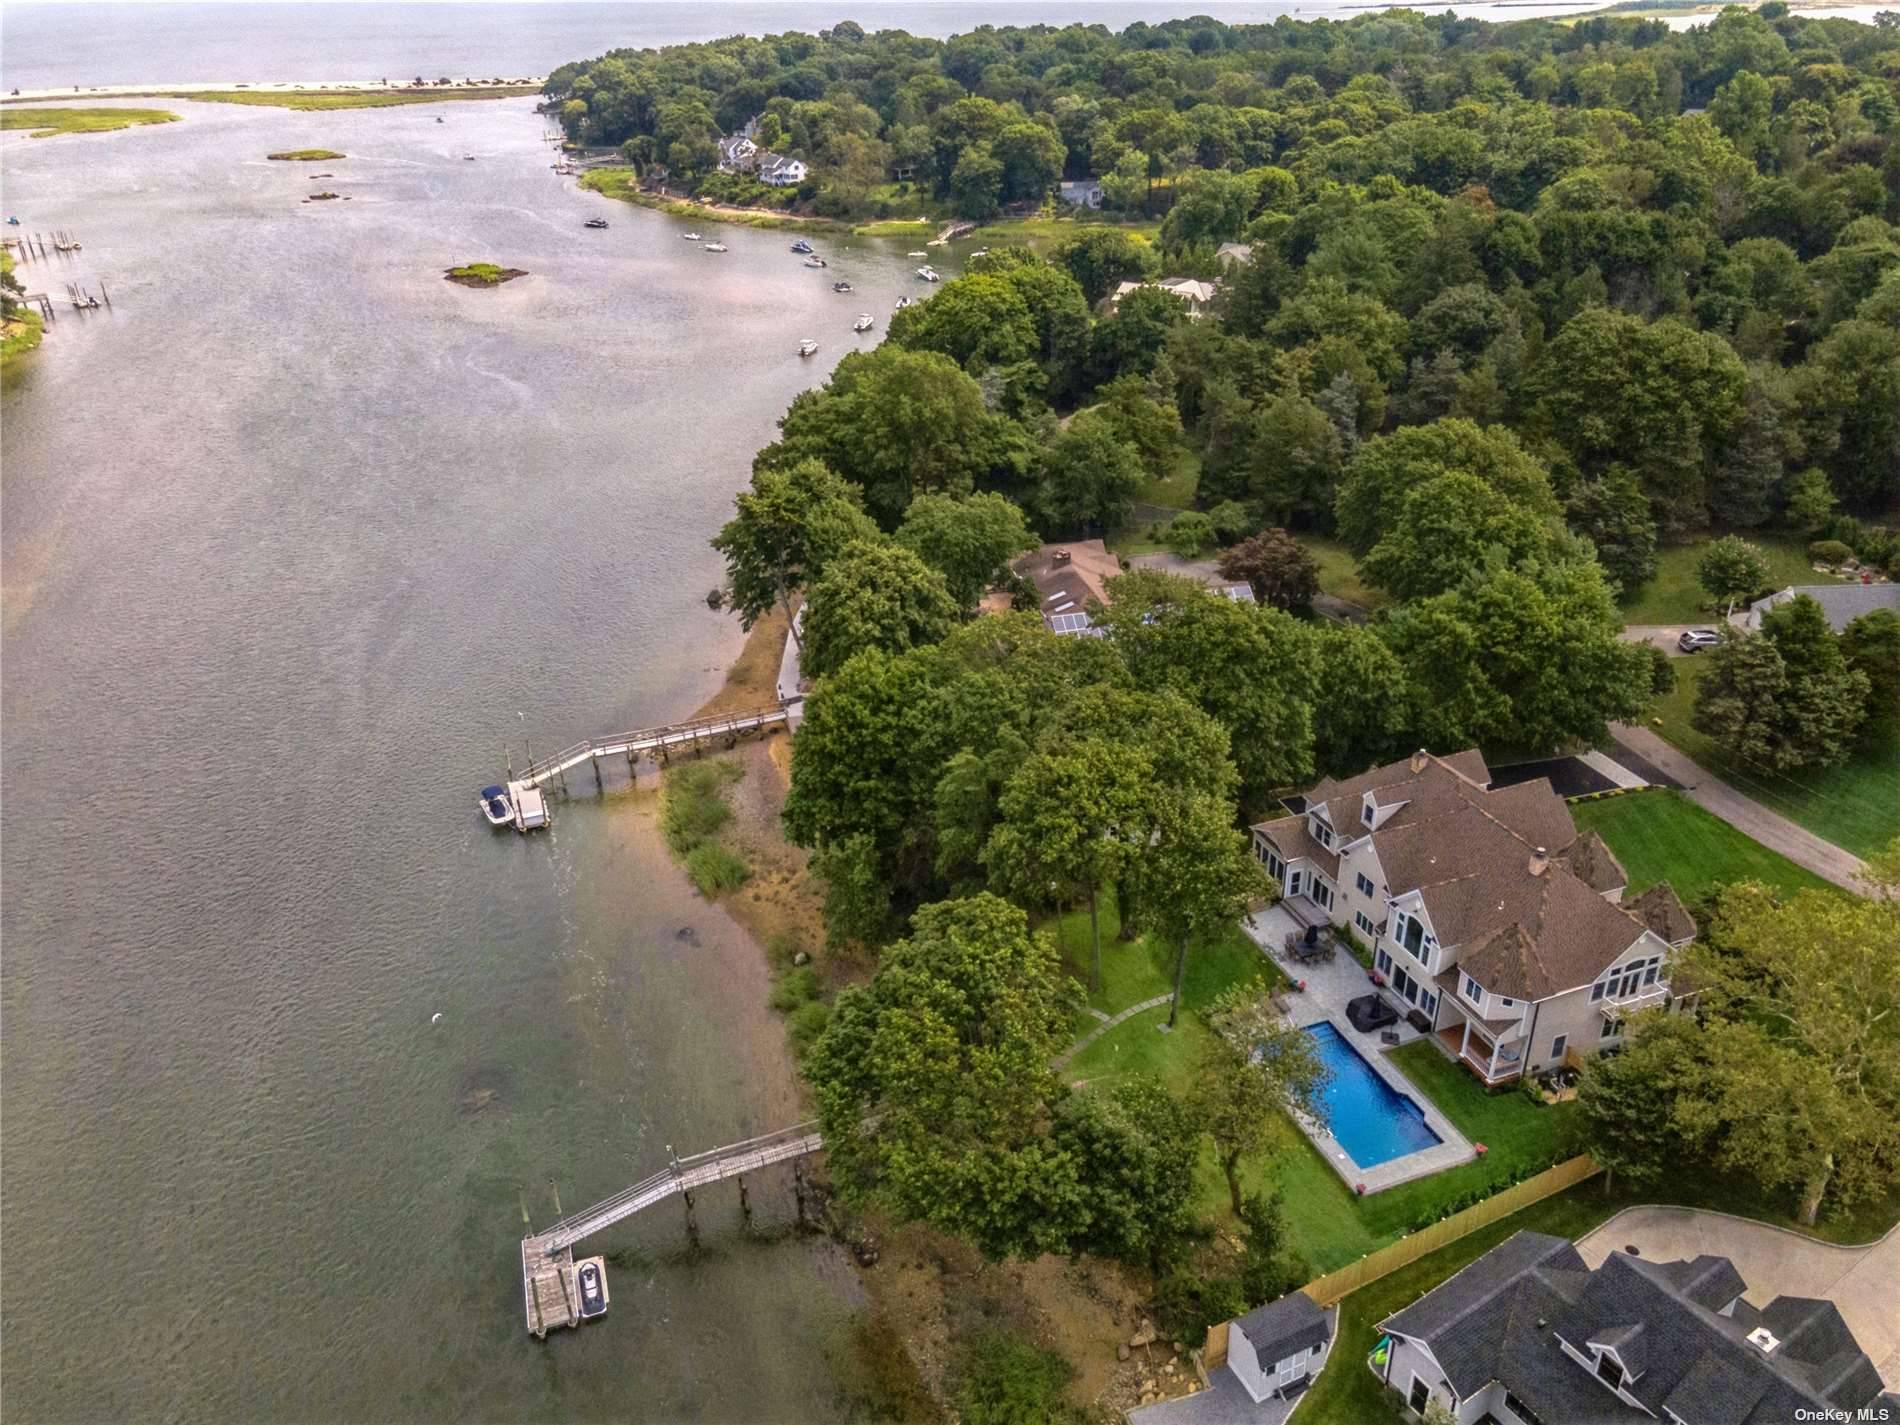 Nestled in the heart of historic Setauket, this Hamptons style residence offers an unparalleled waterfront living experience.